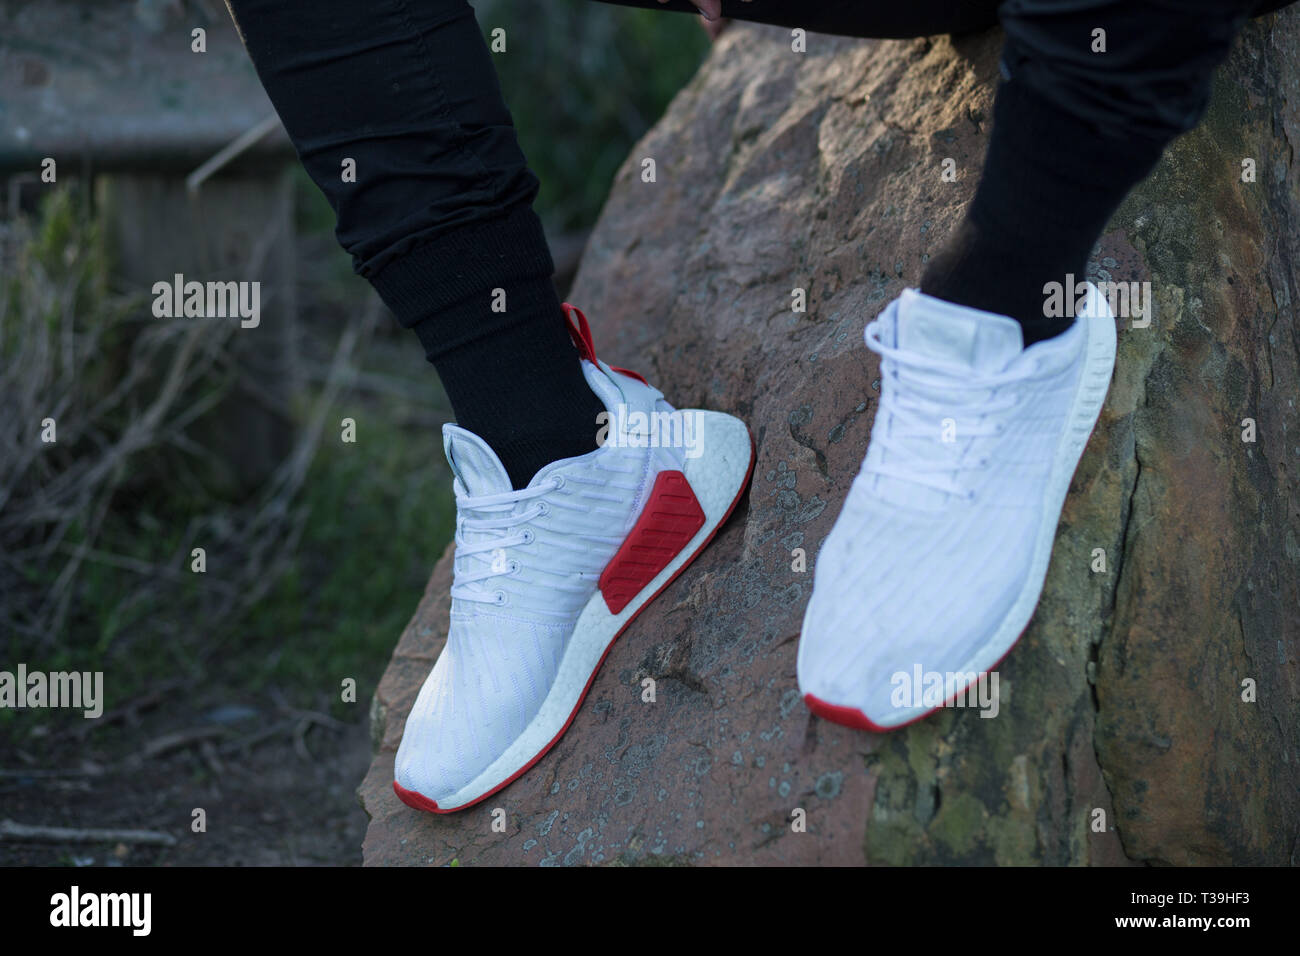 Cape Town, South Africa. 03 April 2019. White and Red Adidas NMD Sneakers  Stock Photo - Alamy